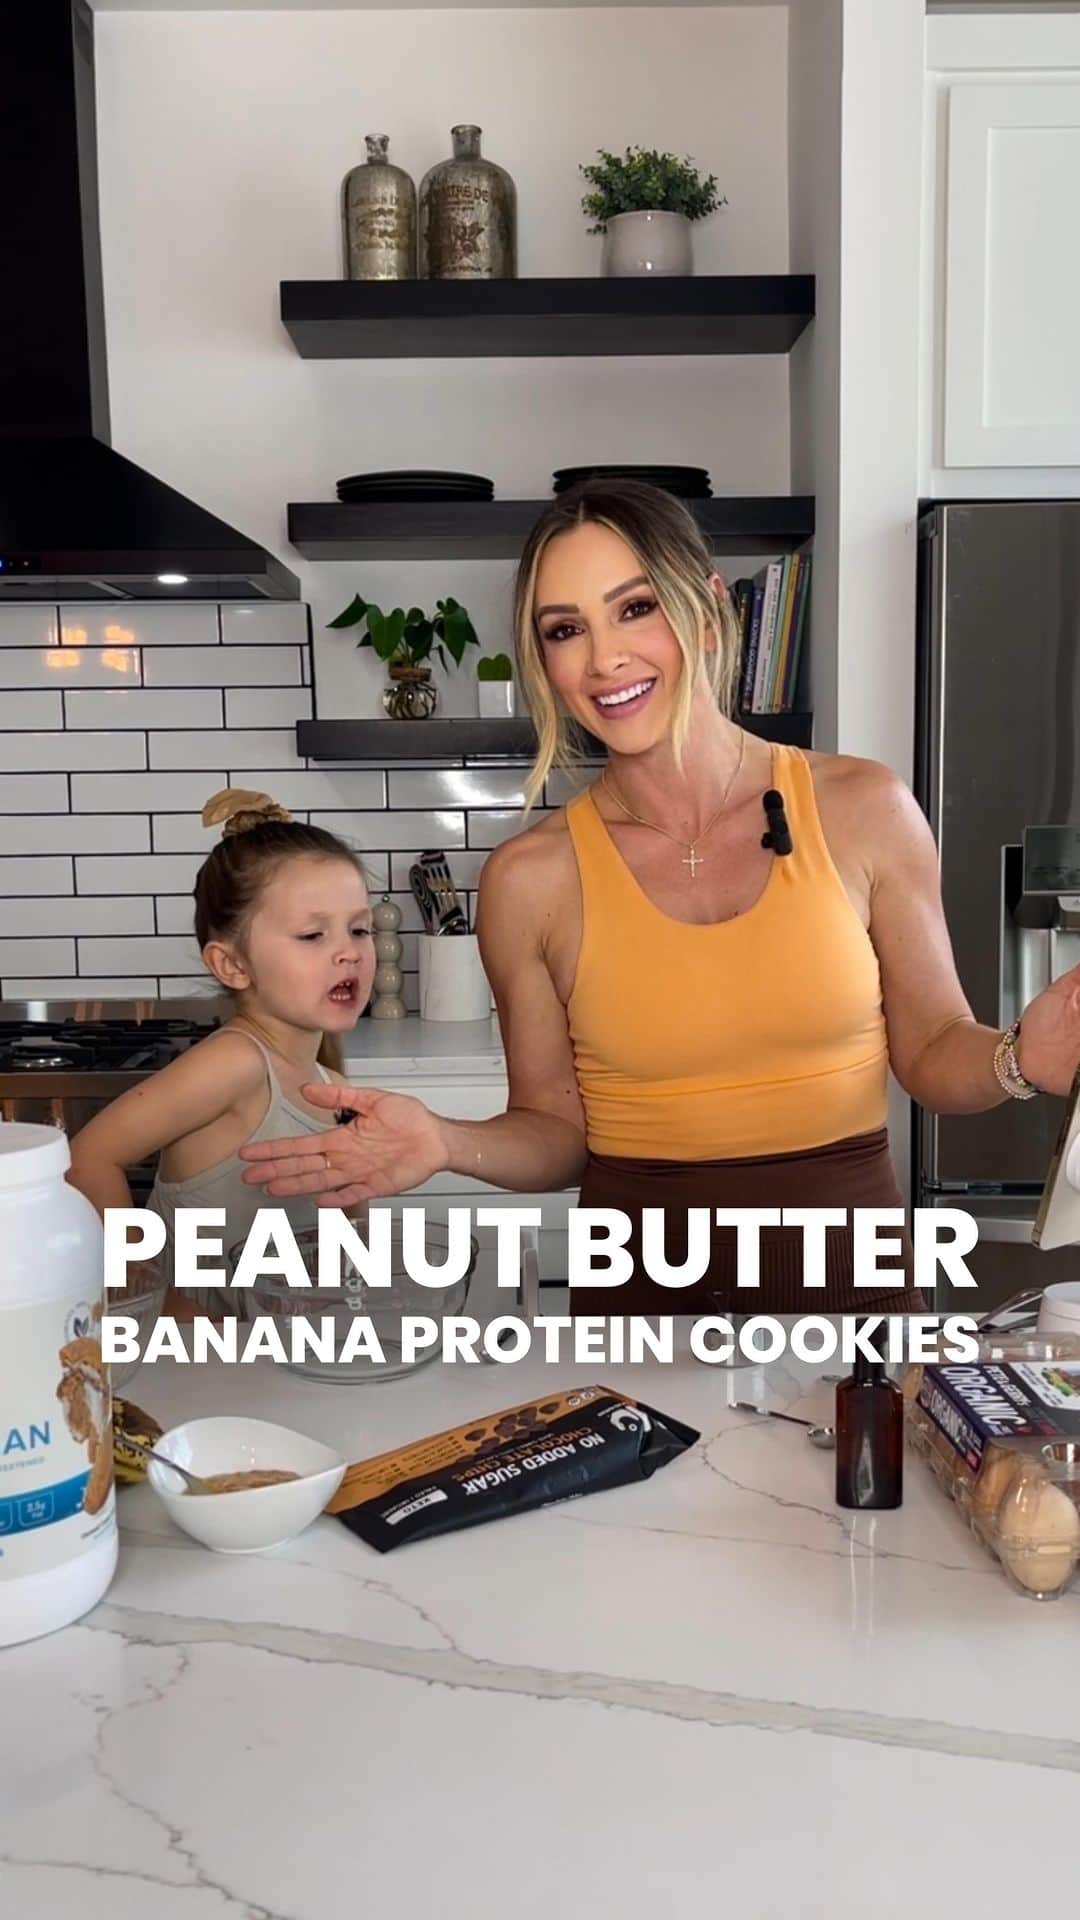 Paige Hathawayのインスタグラム：「I think we should make this a series 😆  What do you think…? Cooking with Presley!  SAVE THIS RECIPE & SHARE IT WITH A FRIEND!  Peanut butter Banana Protein Cookies 🍪  — only 8 ingredients and you prolly already have them.  INGREDIENTS: ➖ 2 ripe bananas ➖ 1 cup old fashioned oats, or quick oats  ➖ 1 scoop @livbody protein powder ➖ 1 large egg  ➖ ¼ tsp cinnamon ➖ ¼ tsp Salt ➖ ½ tsp vanilla extract ➖ ¼ cup peanut butter or seed butter ➖ ¼ cup chocolate chips *of choice  INSTRUCTIONS: ➖ Preheat oven to 350 degrees Fahrenheit. Line a large sheet pans with parchment paper or silicone baking mats. ➖ Adjust the oven rack to second position from the bottom. ➖ Begin by mashing bananas in bowl. ➖ Next, add the oats, protein powder, egg, cinnamon, salt, vanilla, peanut butter, and chocolate chips to the mashed bananas. Stir until combined. ➖ Use a large spoon to scoop portions of the mixture onto the prepared baking sheets. Continue this process until you have placed 8-10 cookies on each sheet. ➖ Bake in the preheated oven for 15 to 20 minutes (checking at 15 min mark) ➖ After baking, allow 5 minutes for cooling. Enjoy your delicious healthy cookies!  FOR MORE RECIPES LIKE THIS ONE JOIN MY COMMUNITY! @fitin5coaching   #HealthyEating #snacks #baking #FamilyCooking #KitchenInspiration #cookies」